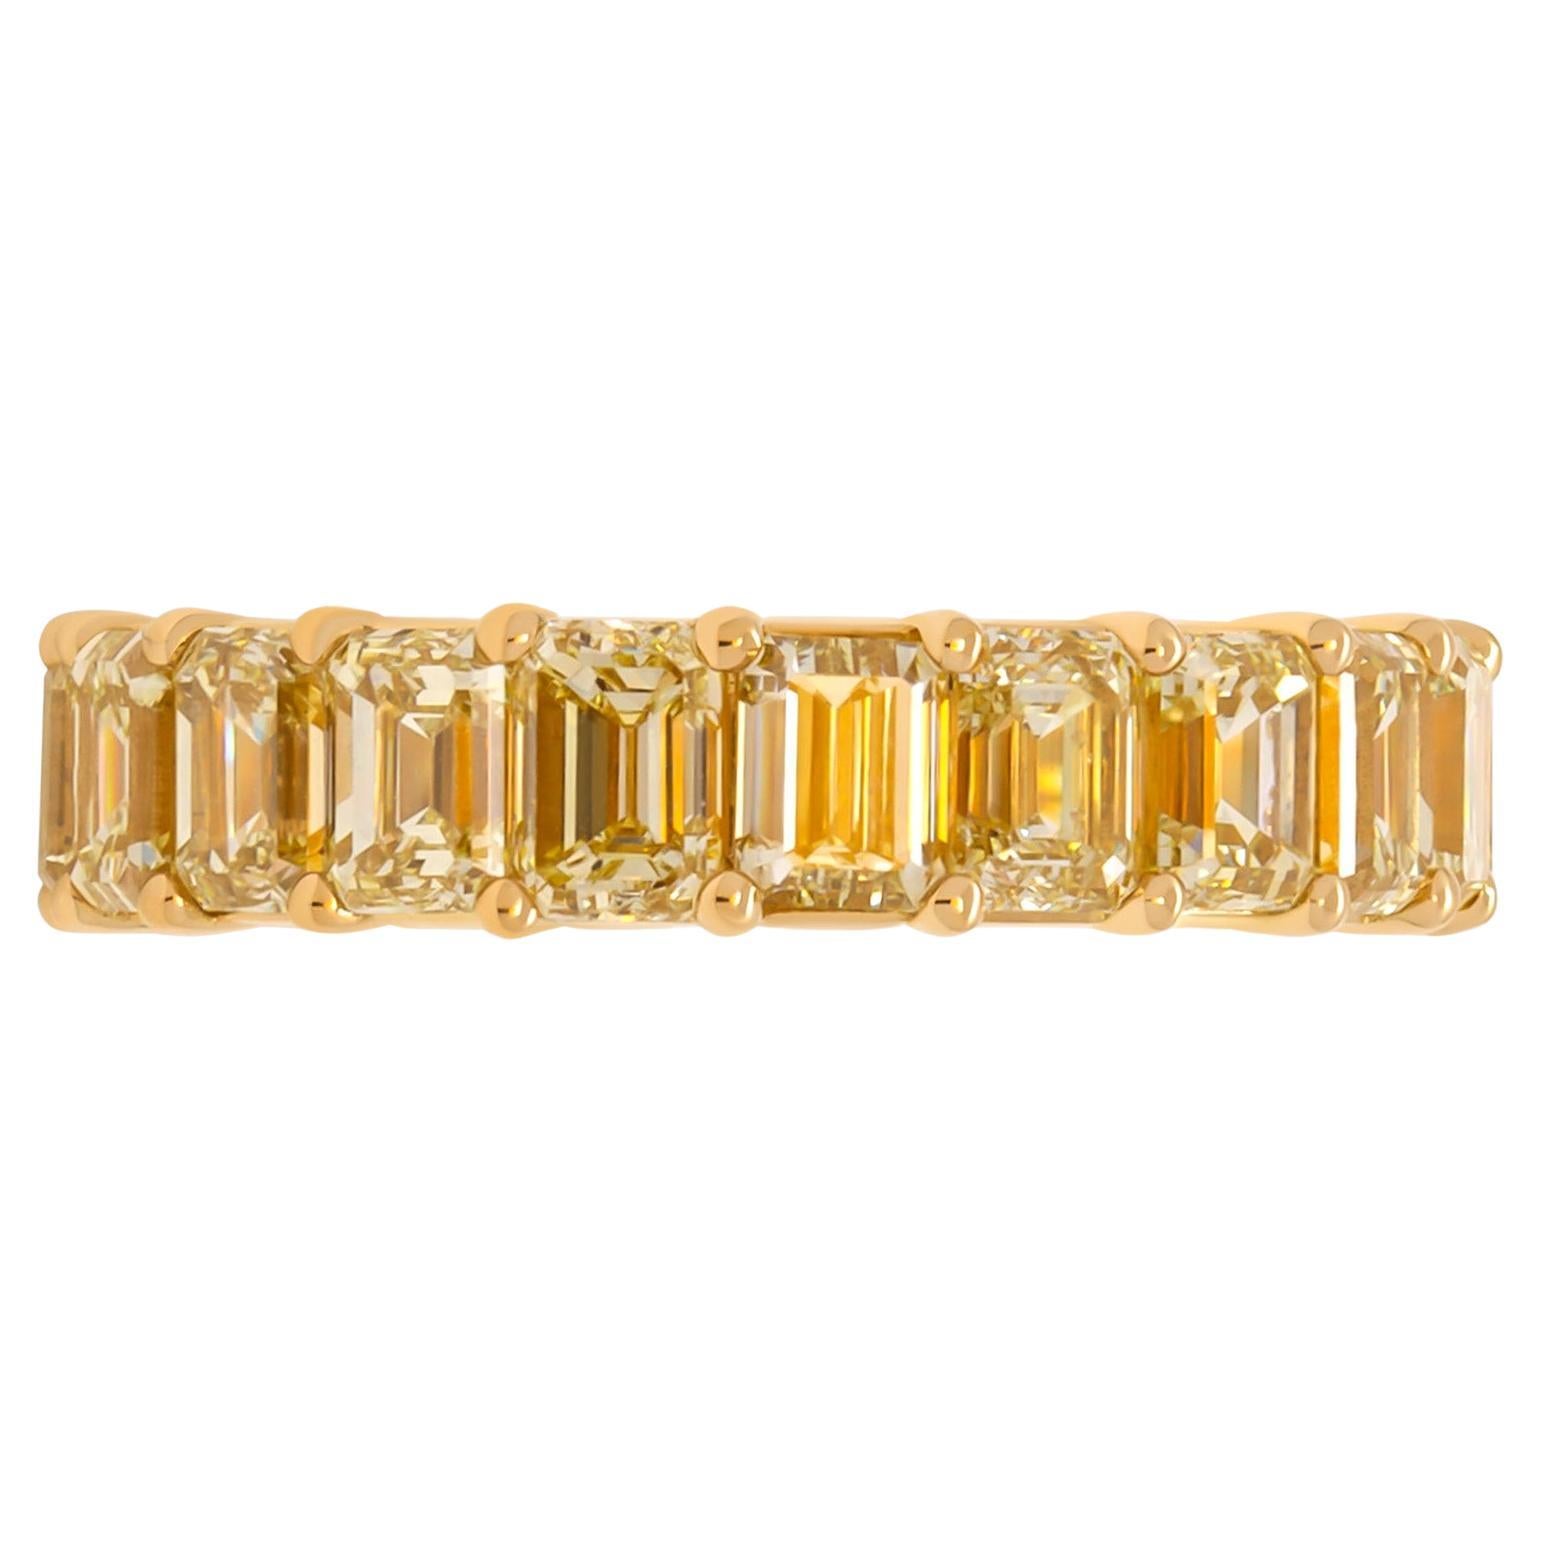 7.69 carat Anniversary Band with Emerald cut diamonds in 18K Yellow Gold
0.38ct each stone
Eternity wedding band with Emerald cut diamonds in 18K Yellow Gold
20 stone 0.38ct each Fancy Yellow
Total Carat Weight: 7.69ct 
Size:6